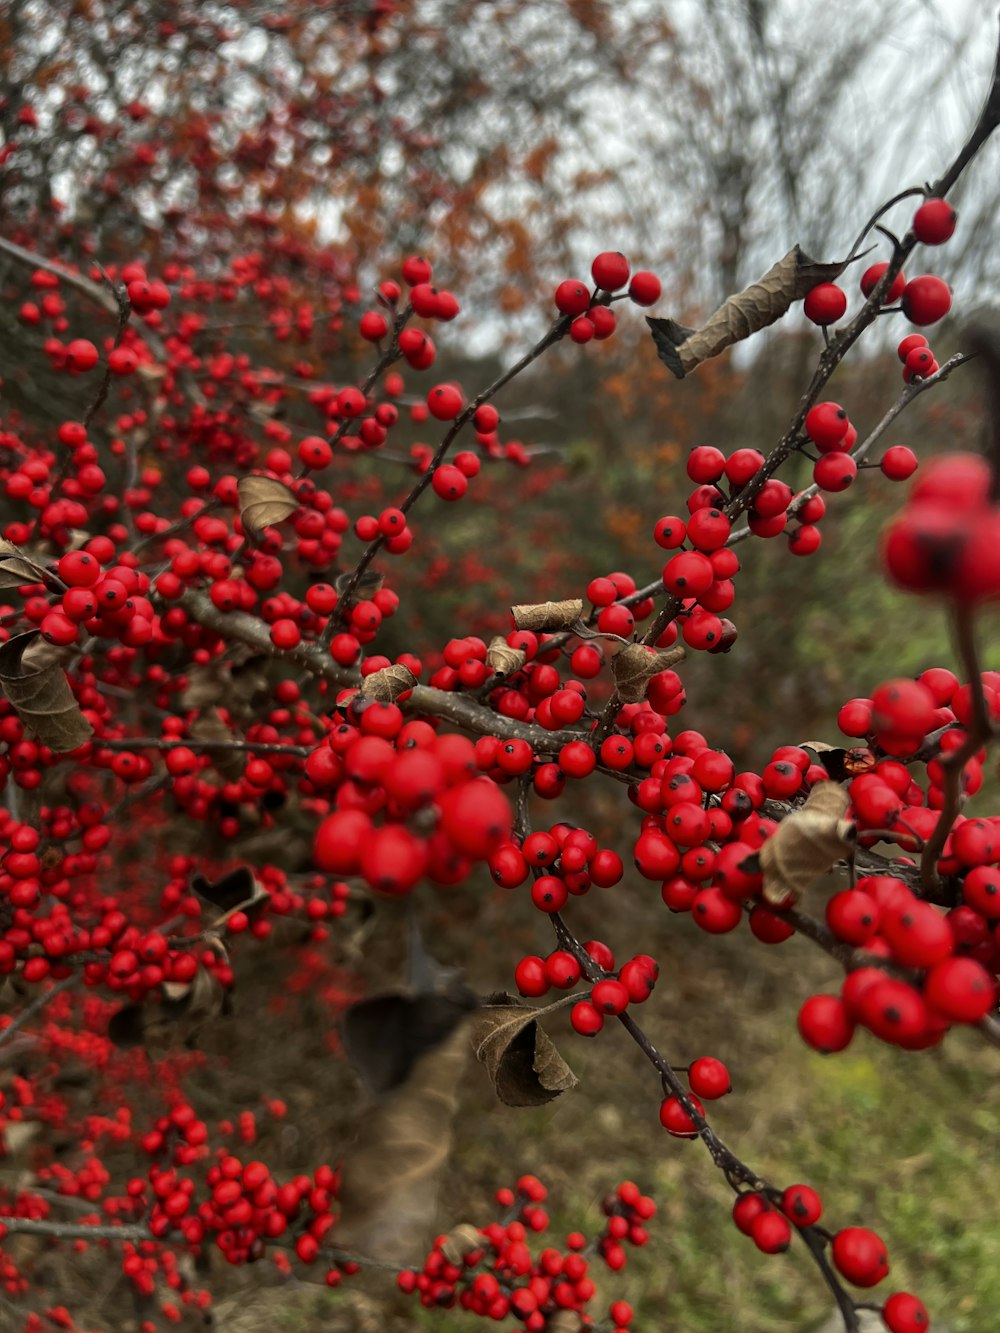 red berries are growing on a tree branch